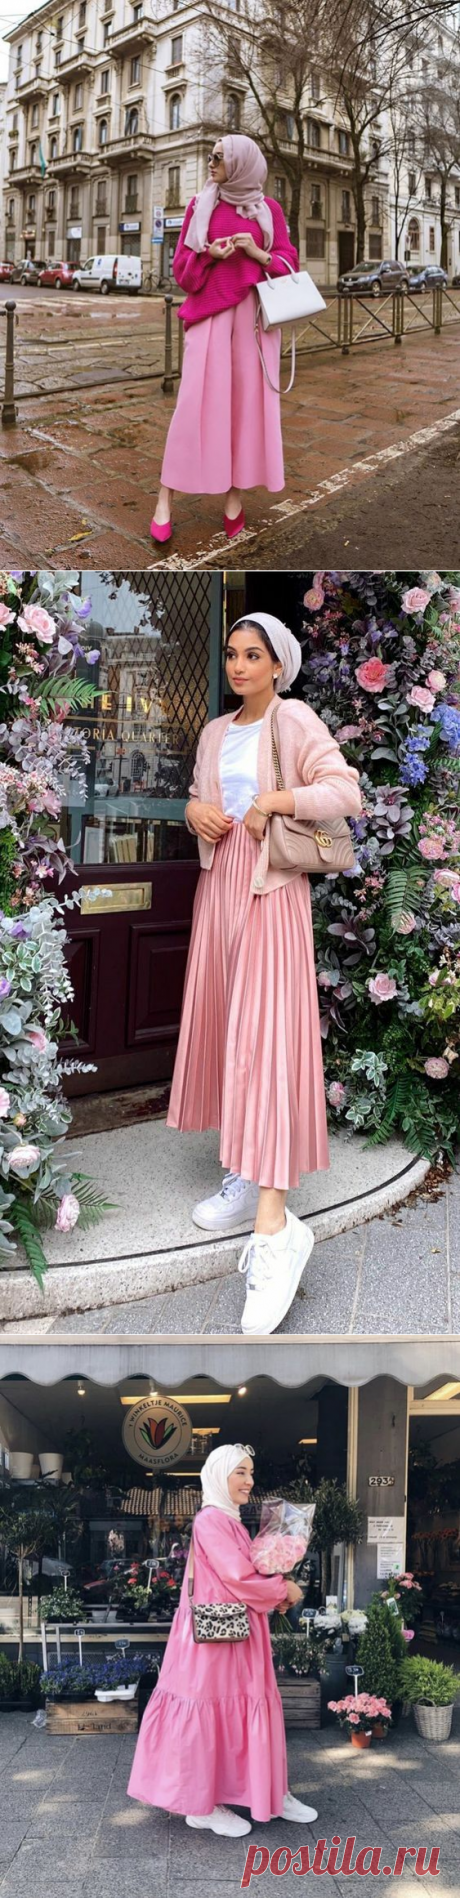 Chic Ways to Style Pink Hijab Outfit Looks - Hijab-style.com